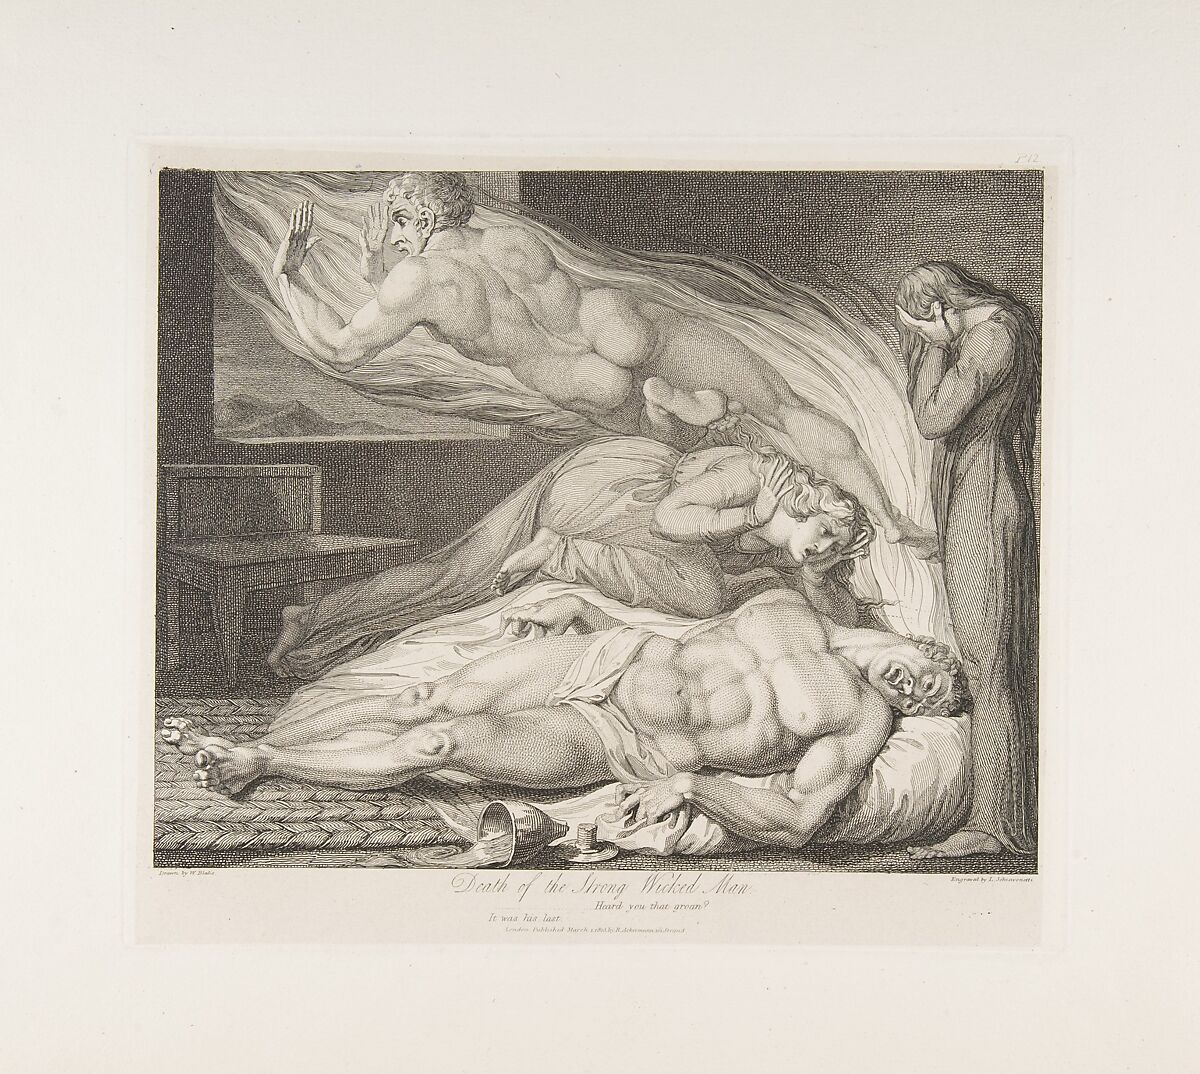 Death of the Strong Wicked Man, from "The Grave," a Poem by Robert Blair, After William Blake (British, London 1757–1827 London), Engraving 